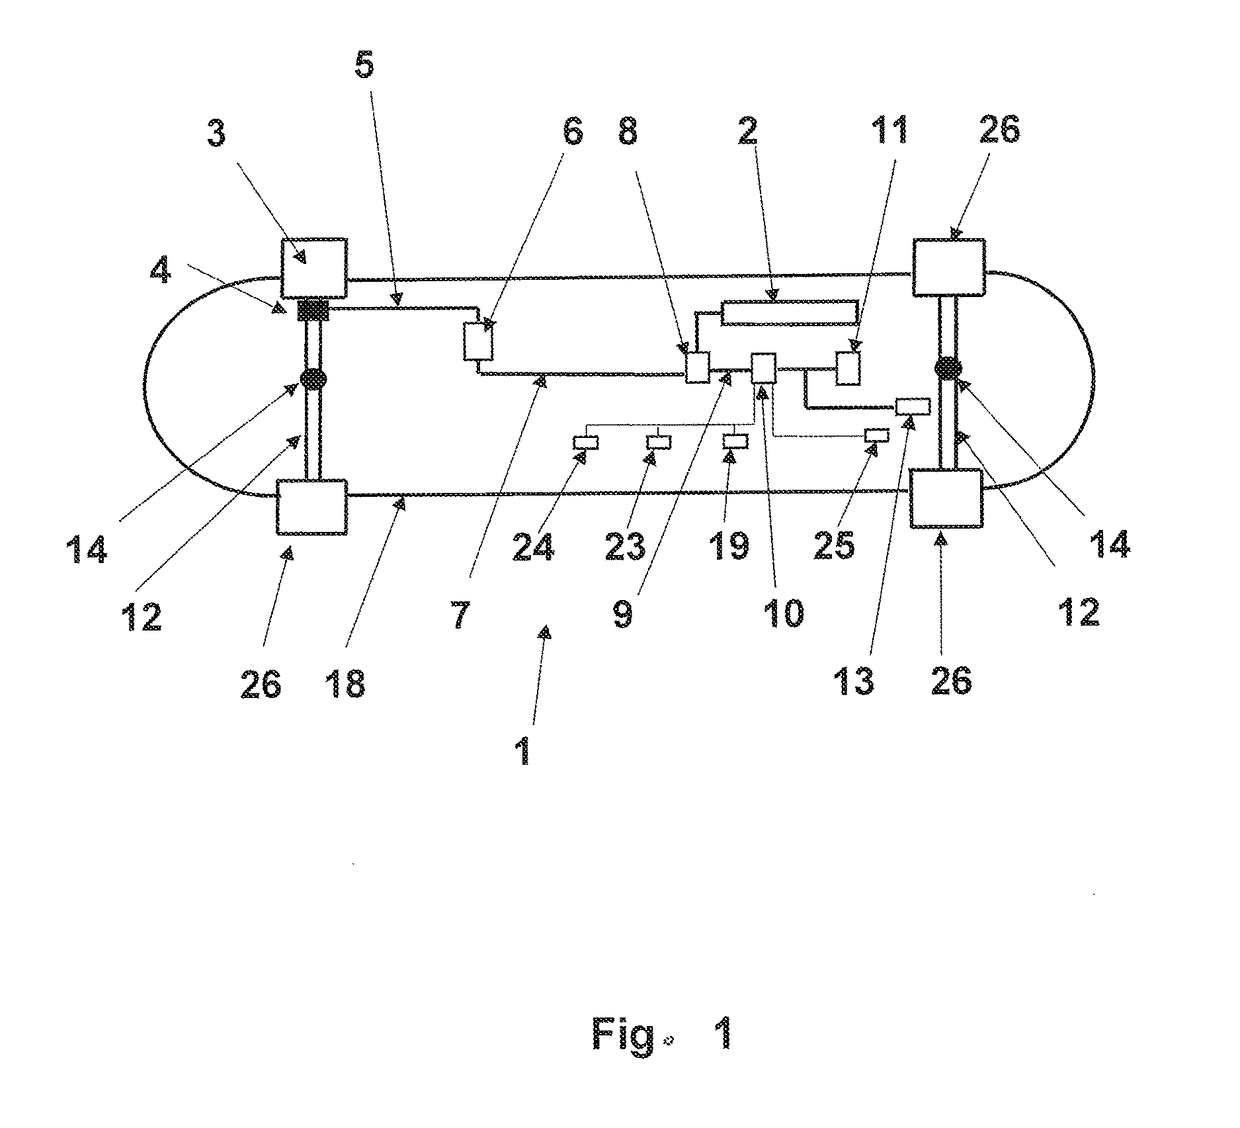 Motor control and regulating device, especially for an electrically driven skateboard or longboard